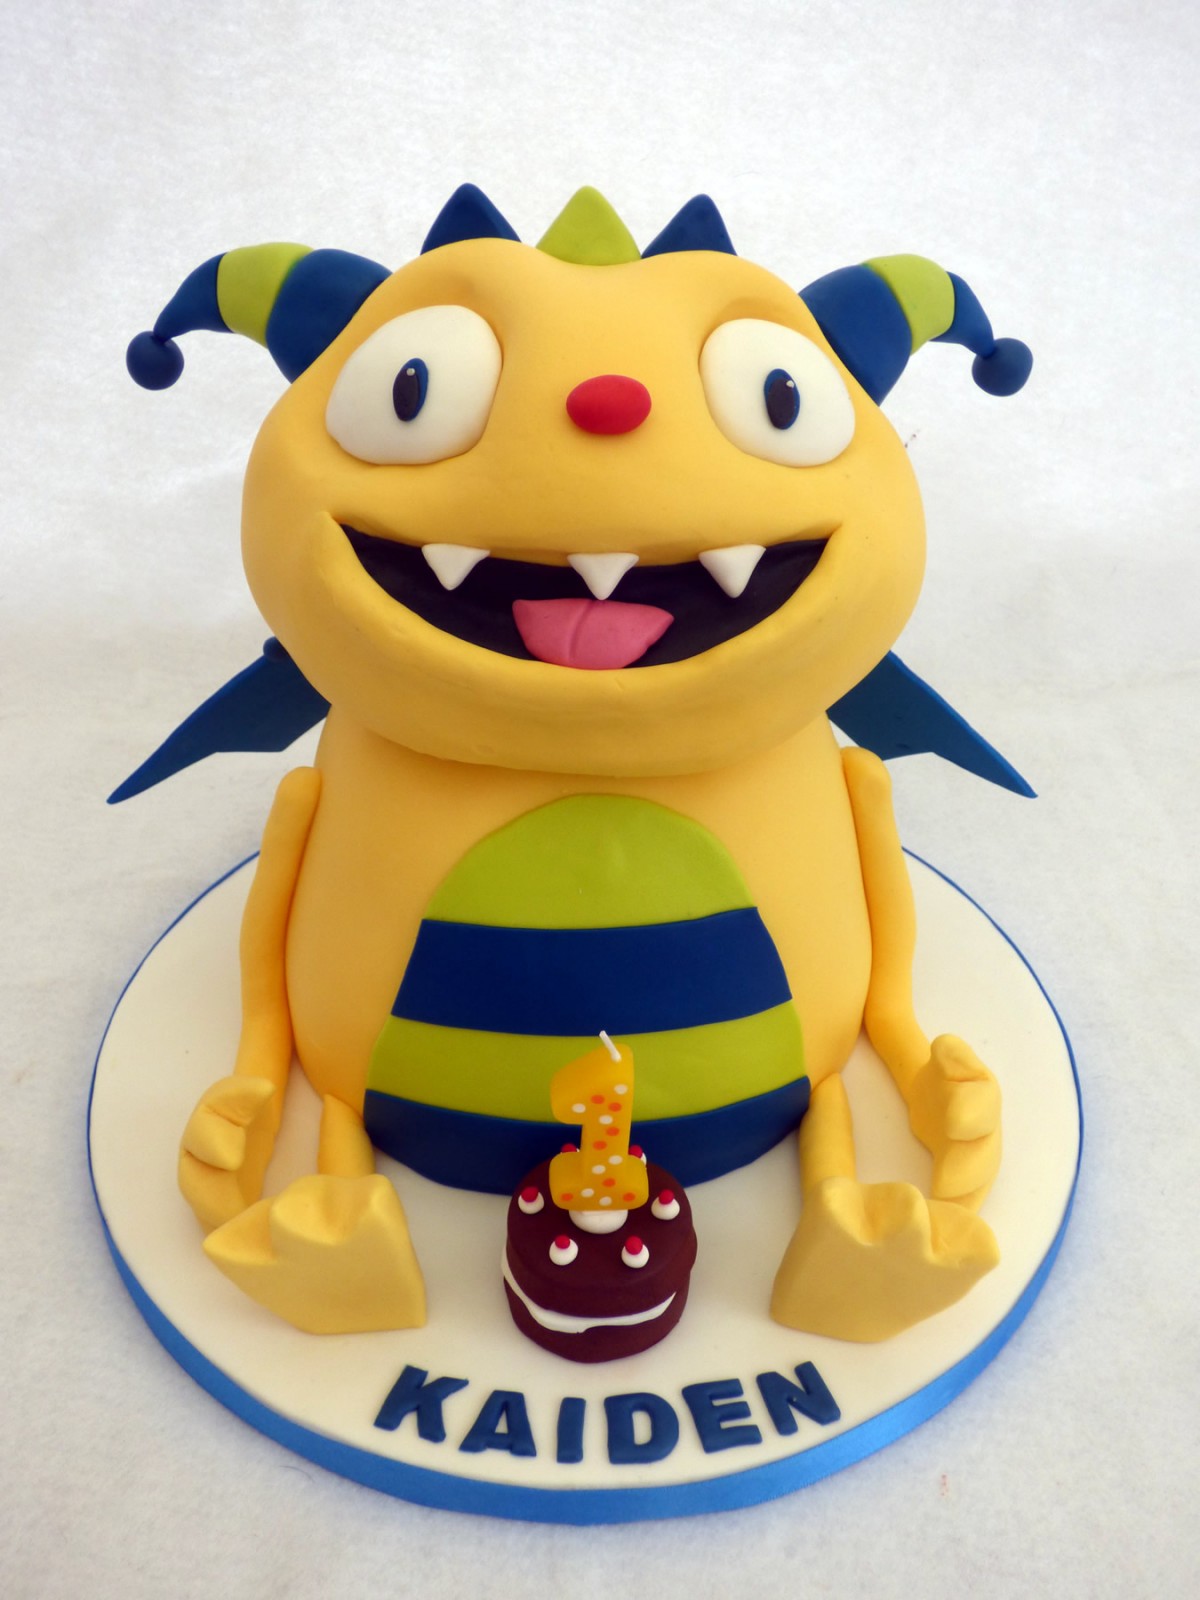 Reviewer in the middle of nowhere Far away Henry Hugglemonster Character Birthday Cake | Susie's Cakes